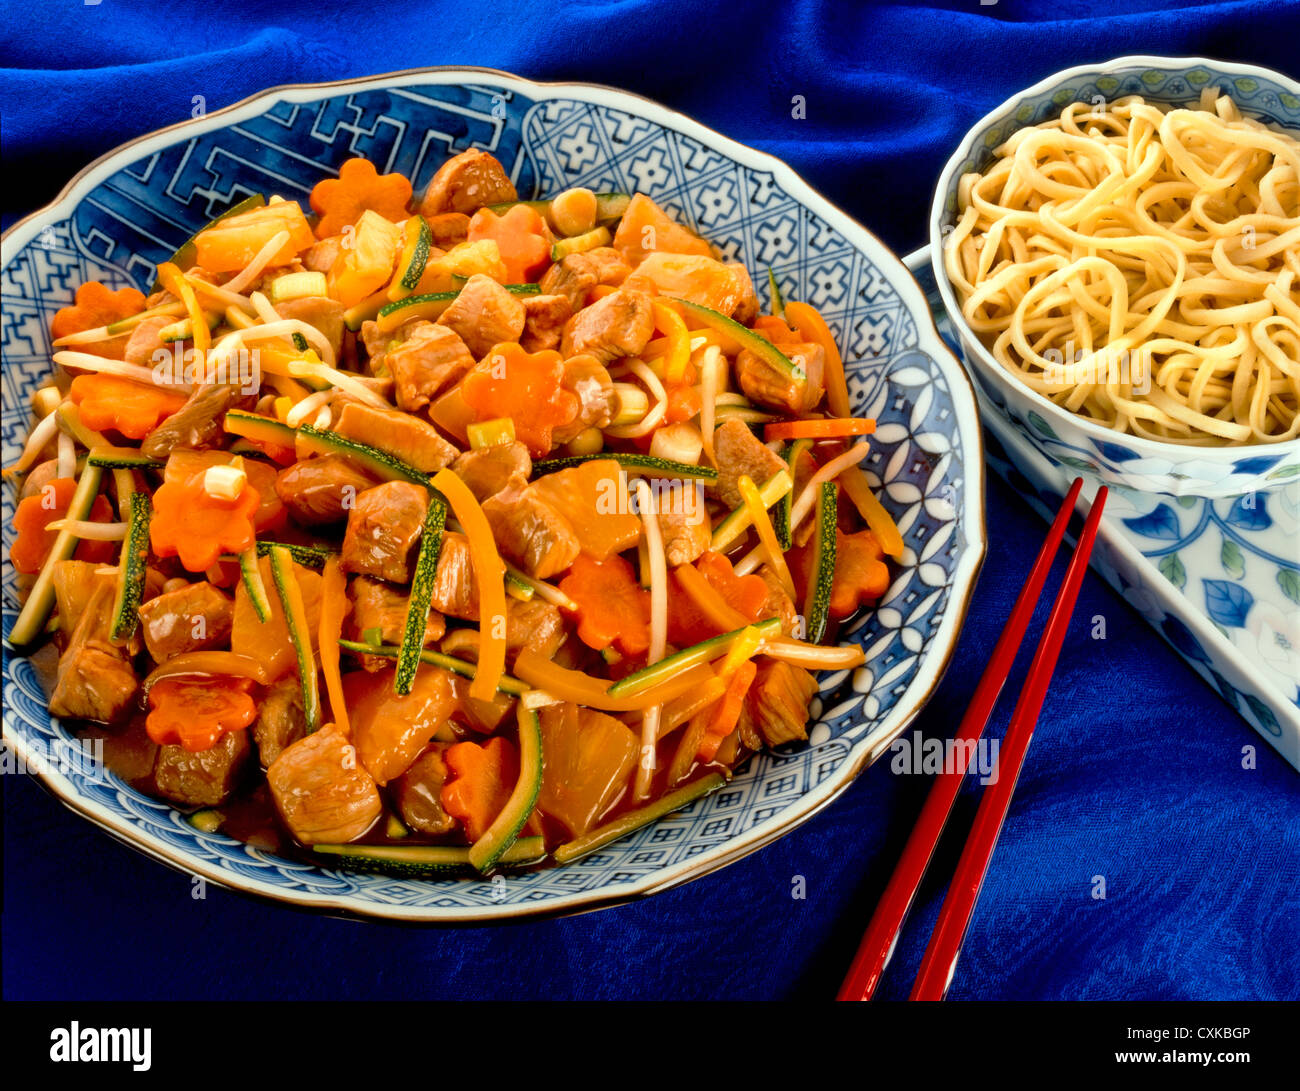 PORK AND VEGETABLE STIR FRY WITH NOODLES Stock Photo